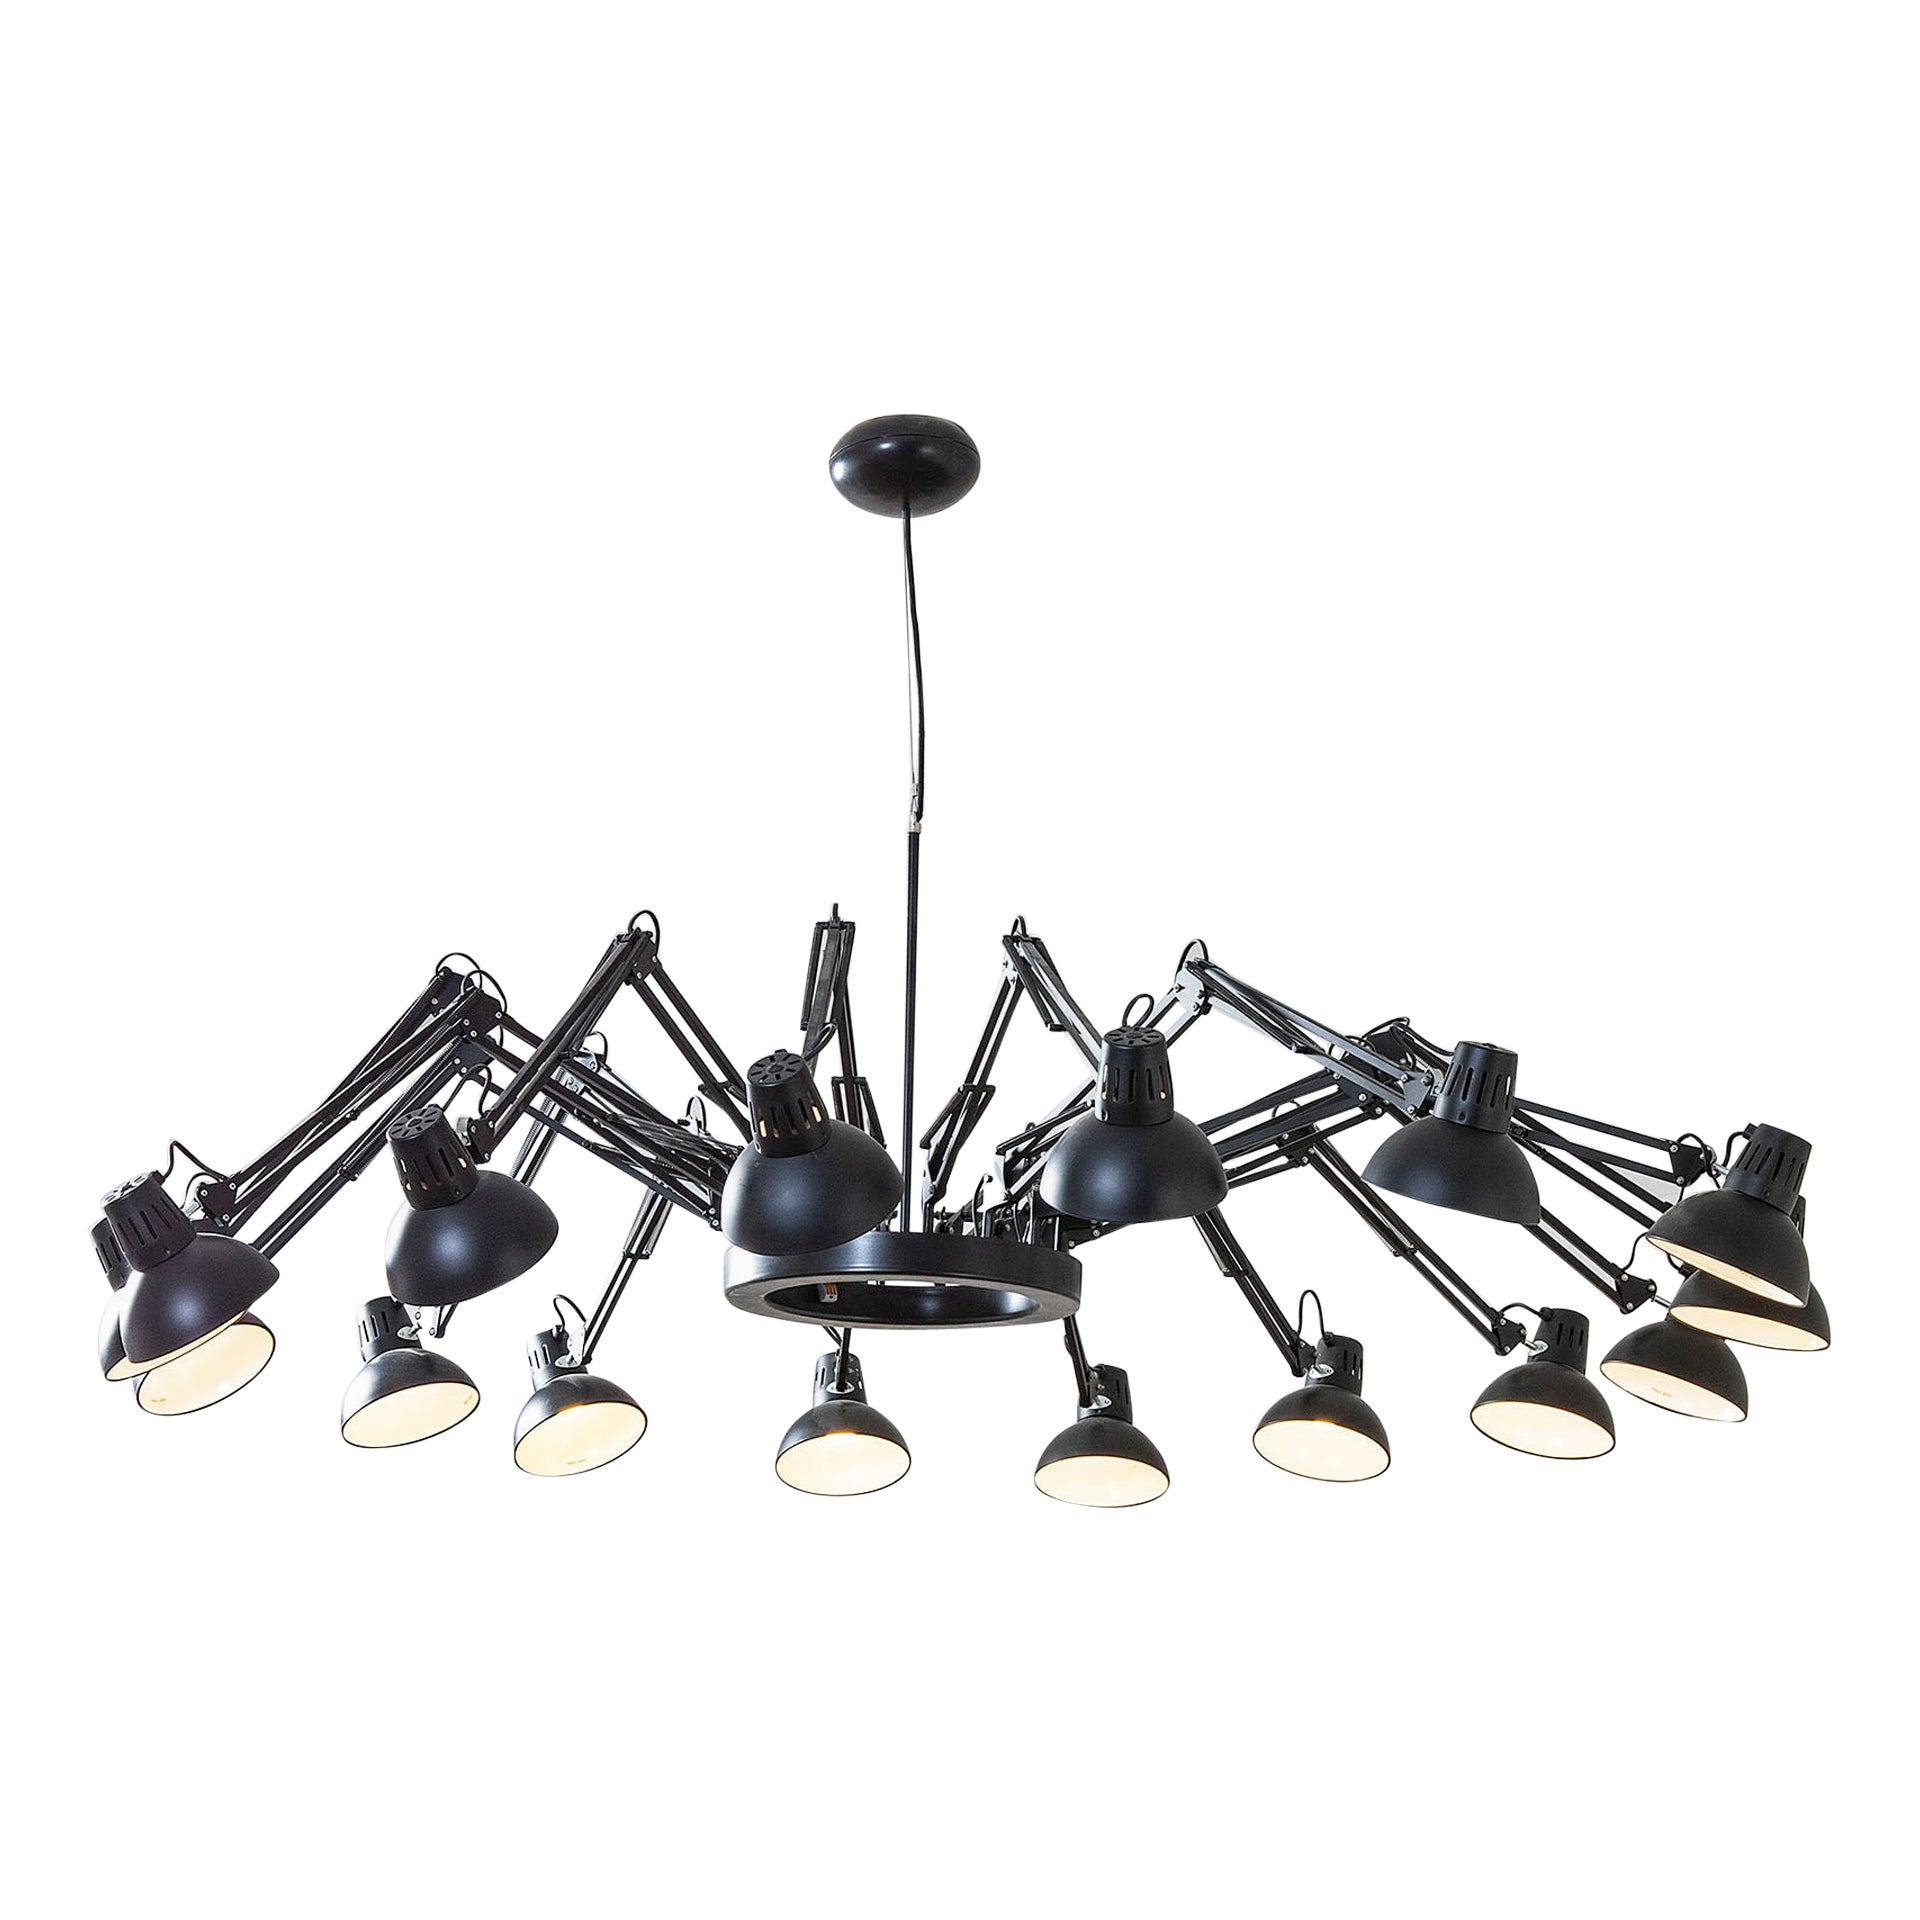 Ron Gilad Chandelier Mod. Dear Ingo for Moooi with 16 Directional Diffusers For Sale